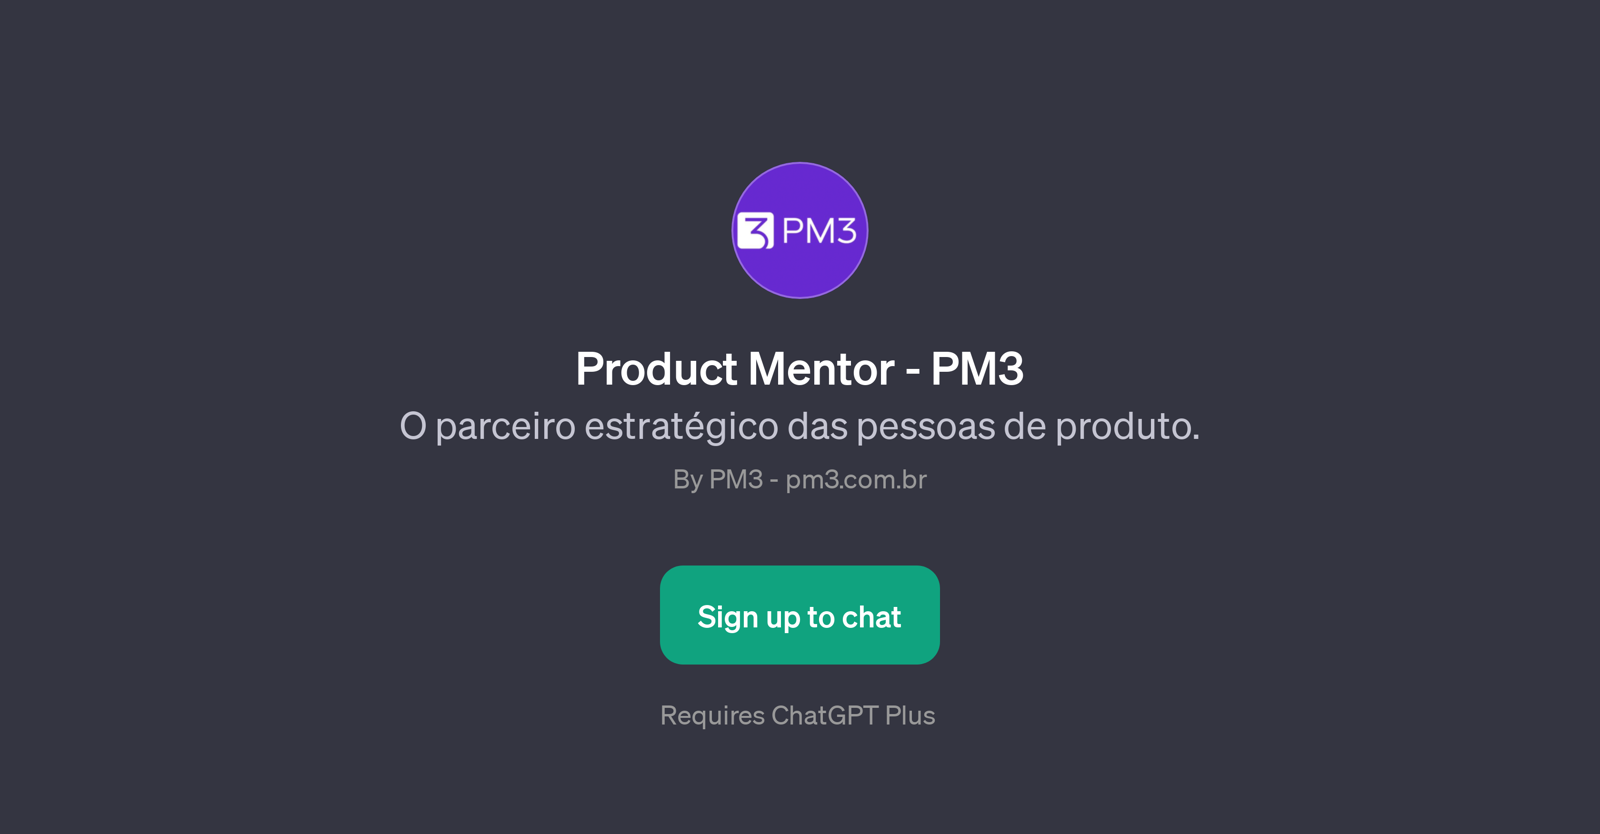 Product Mentor - PM3 website